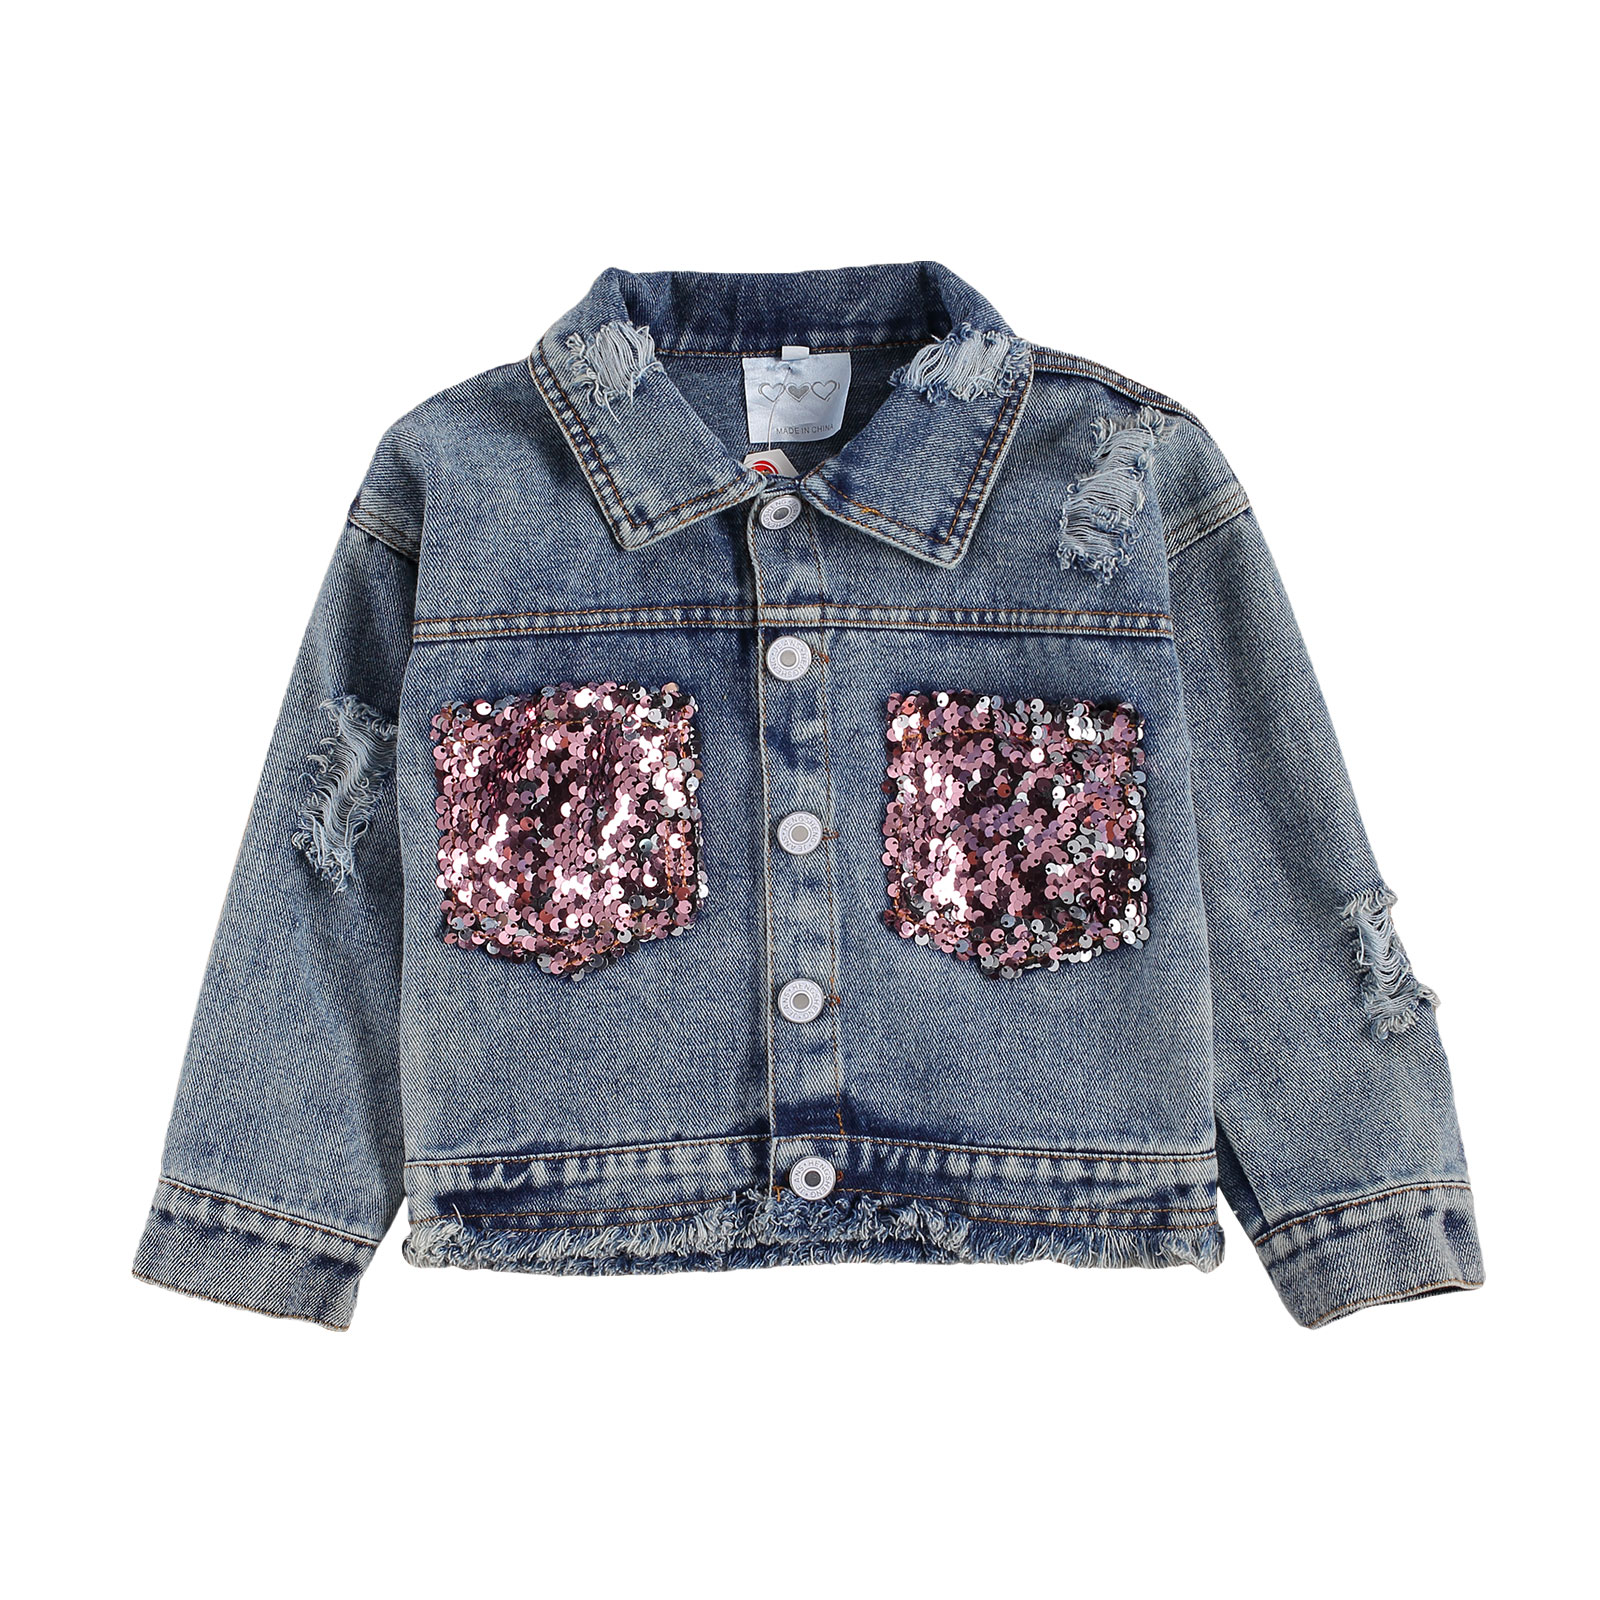 Toddler Baby Girl Coat Long Sleeve Denim Jacket Sequin Pockets Ripped Jean Jacket Outwear 1-6T - image 1 of 10